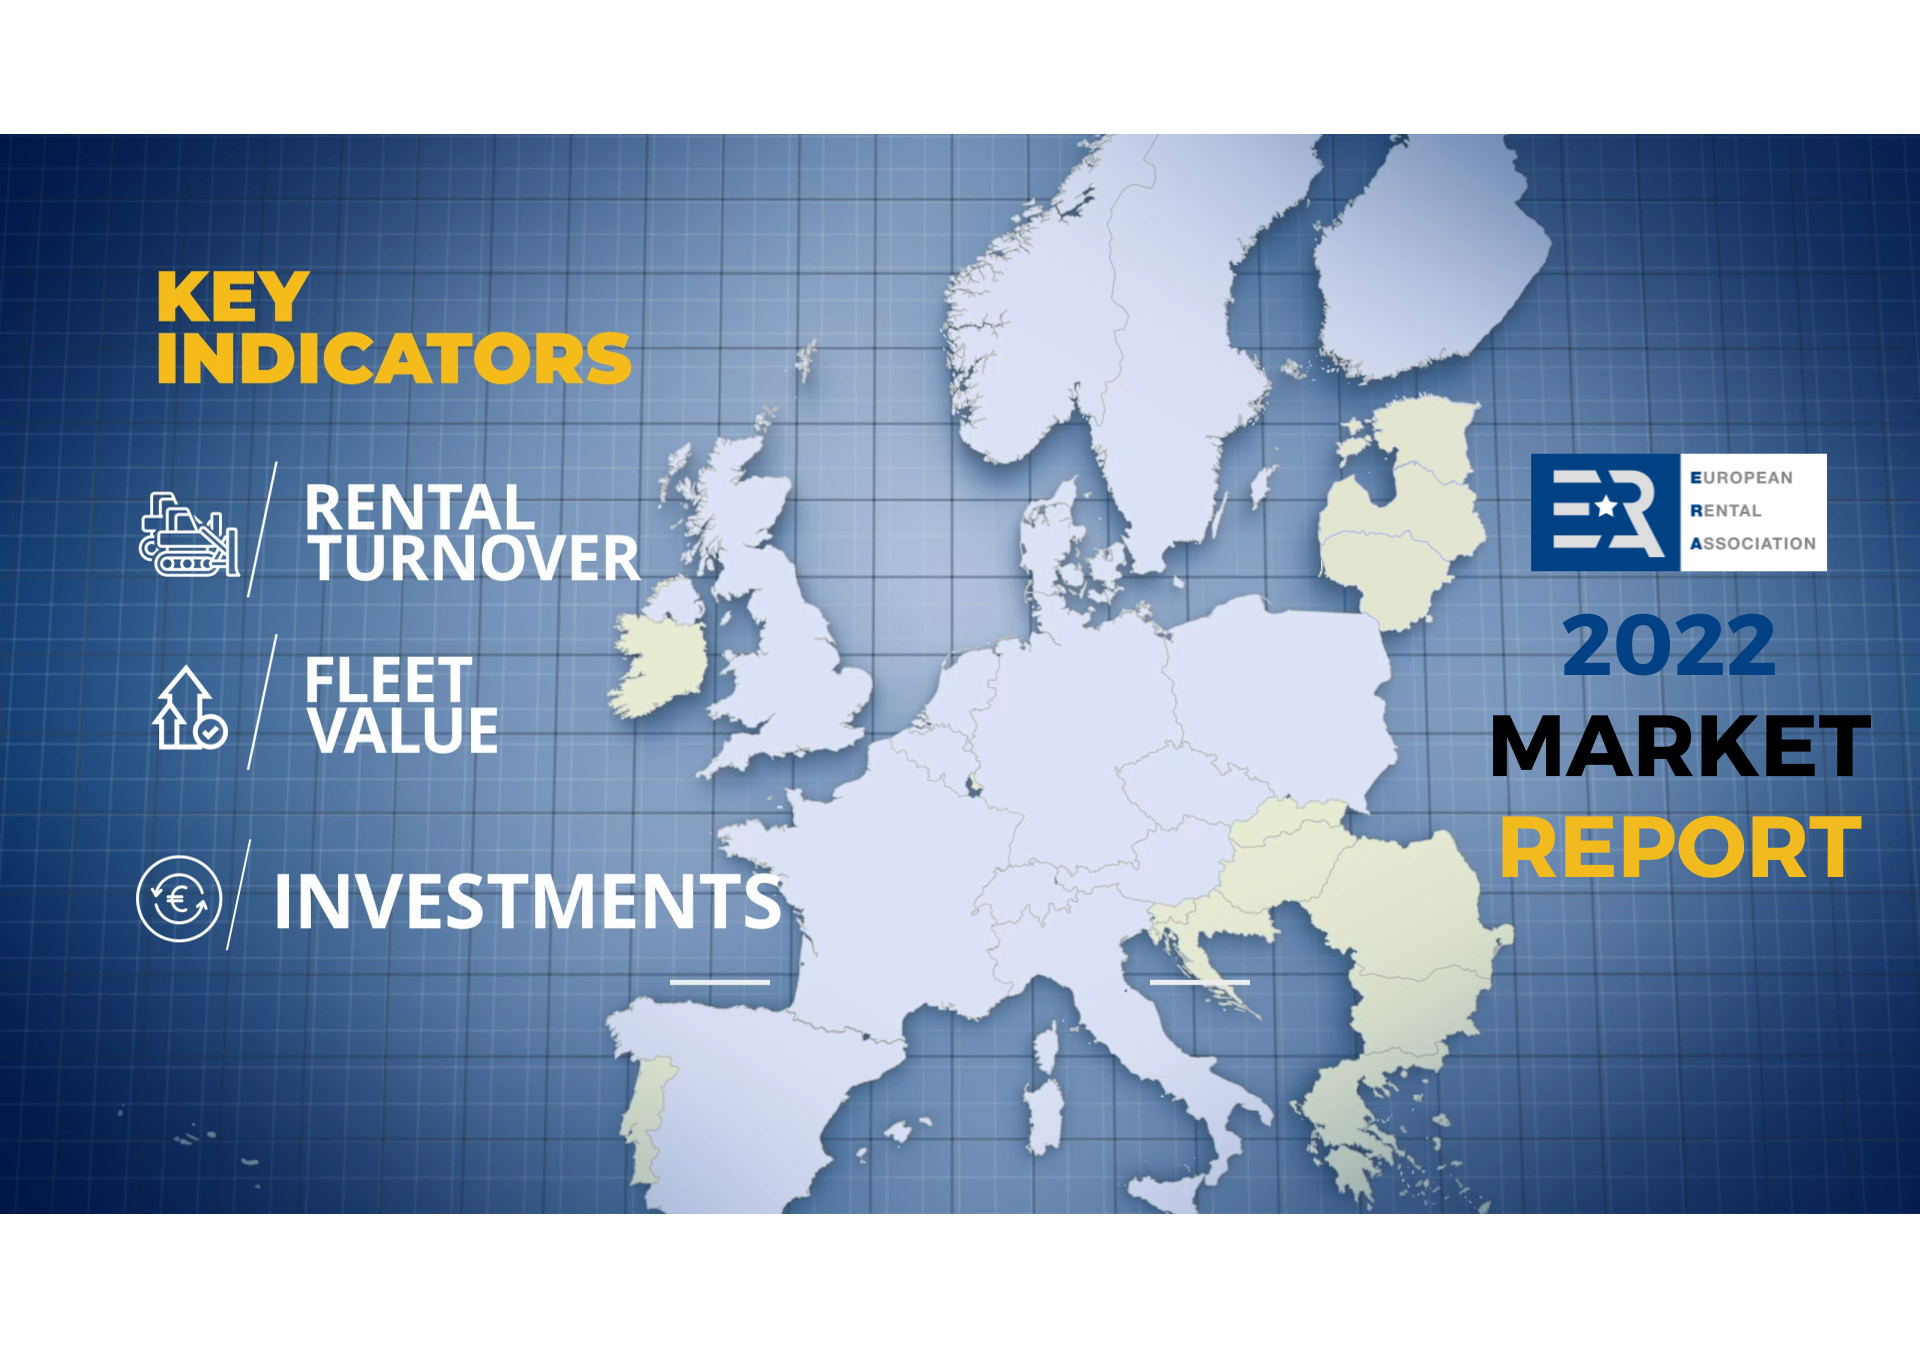 A return to growth in 2021 across all European rental markets, expected to slow down in 2022 and 2023